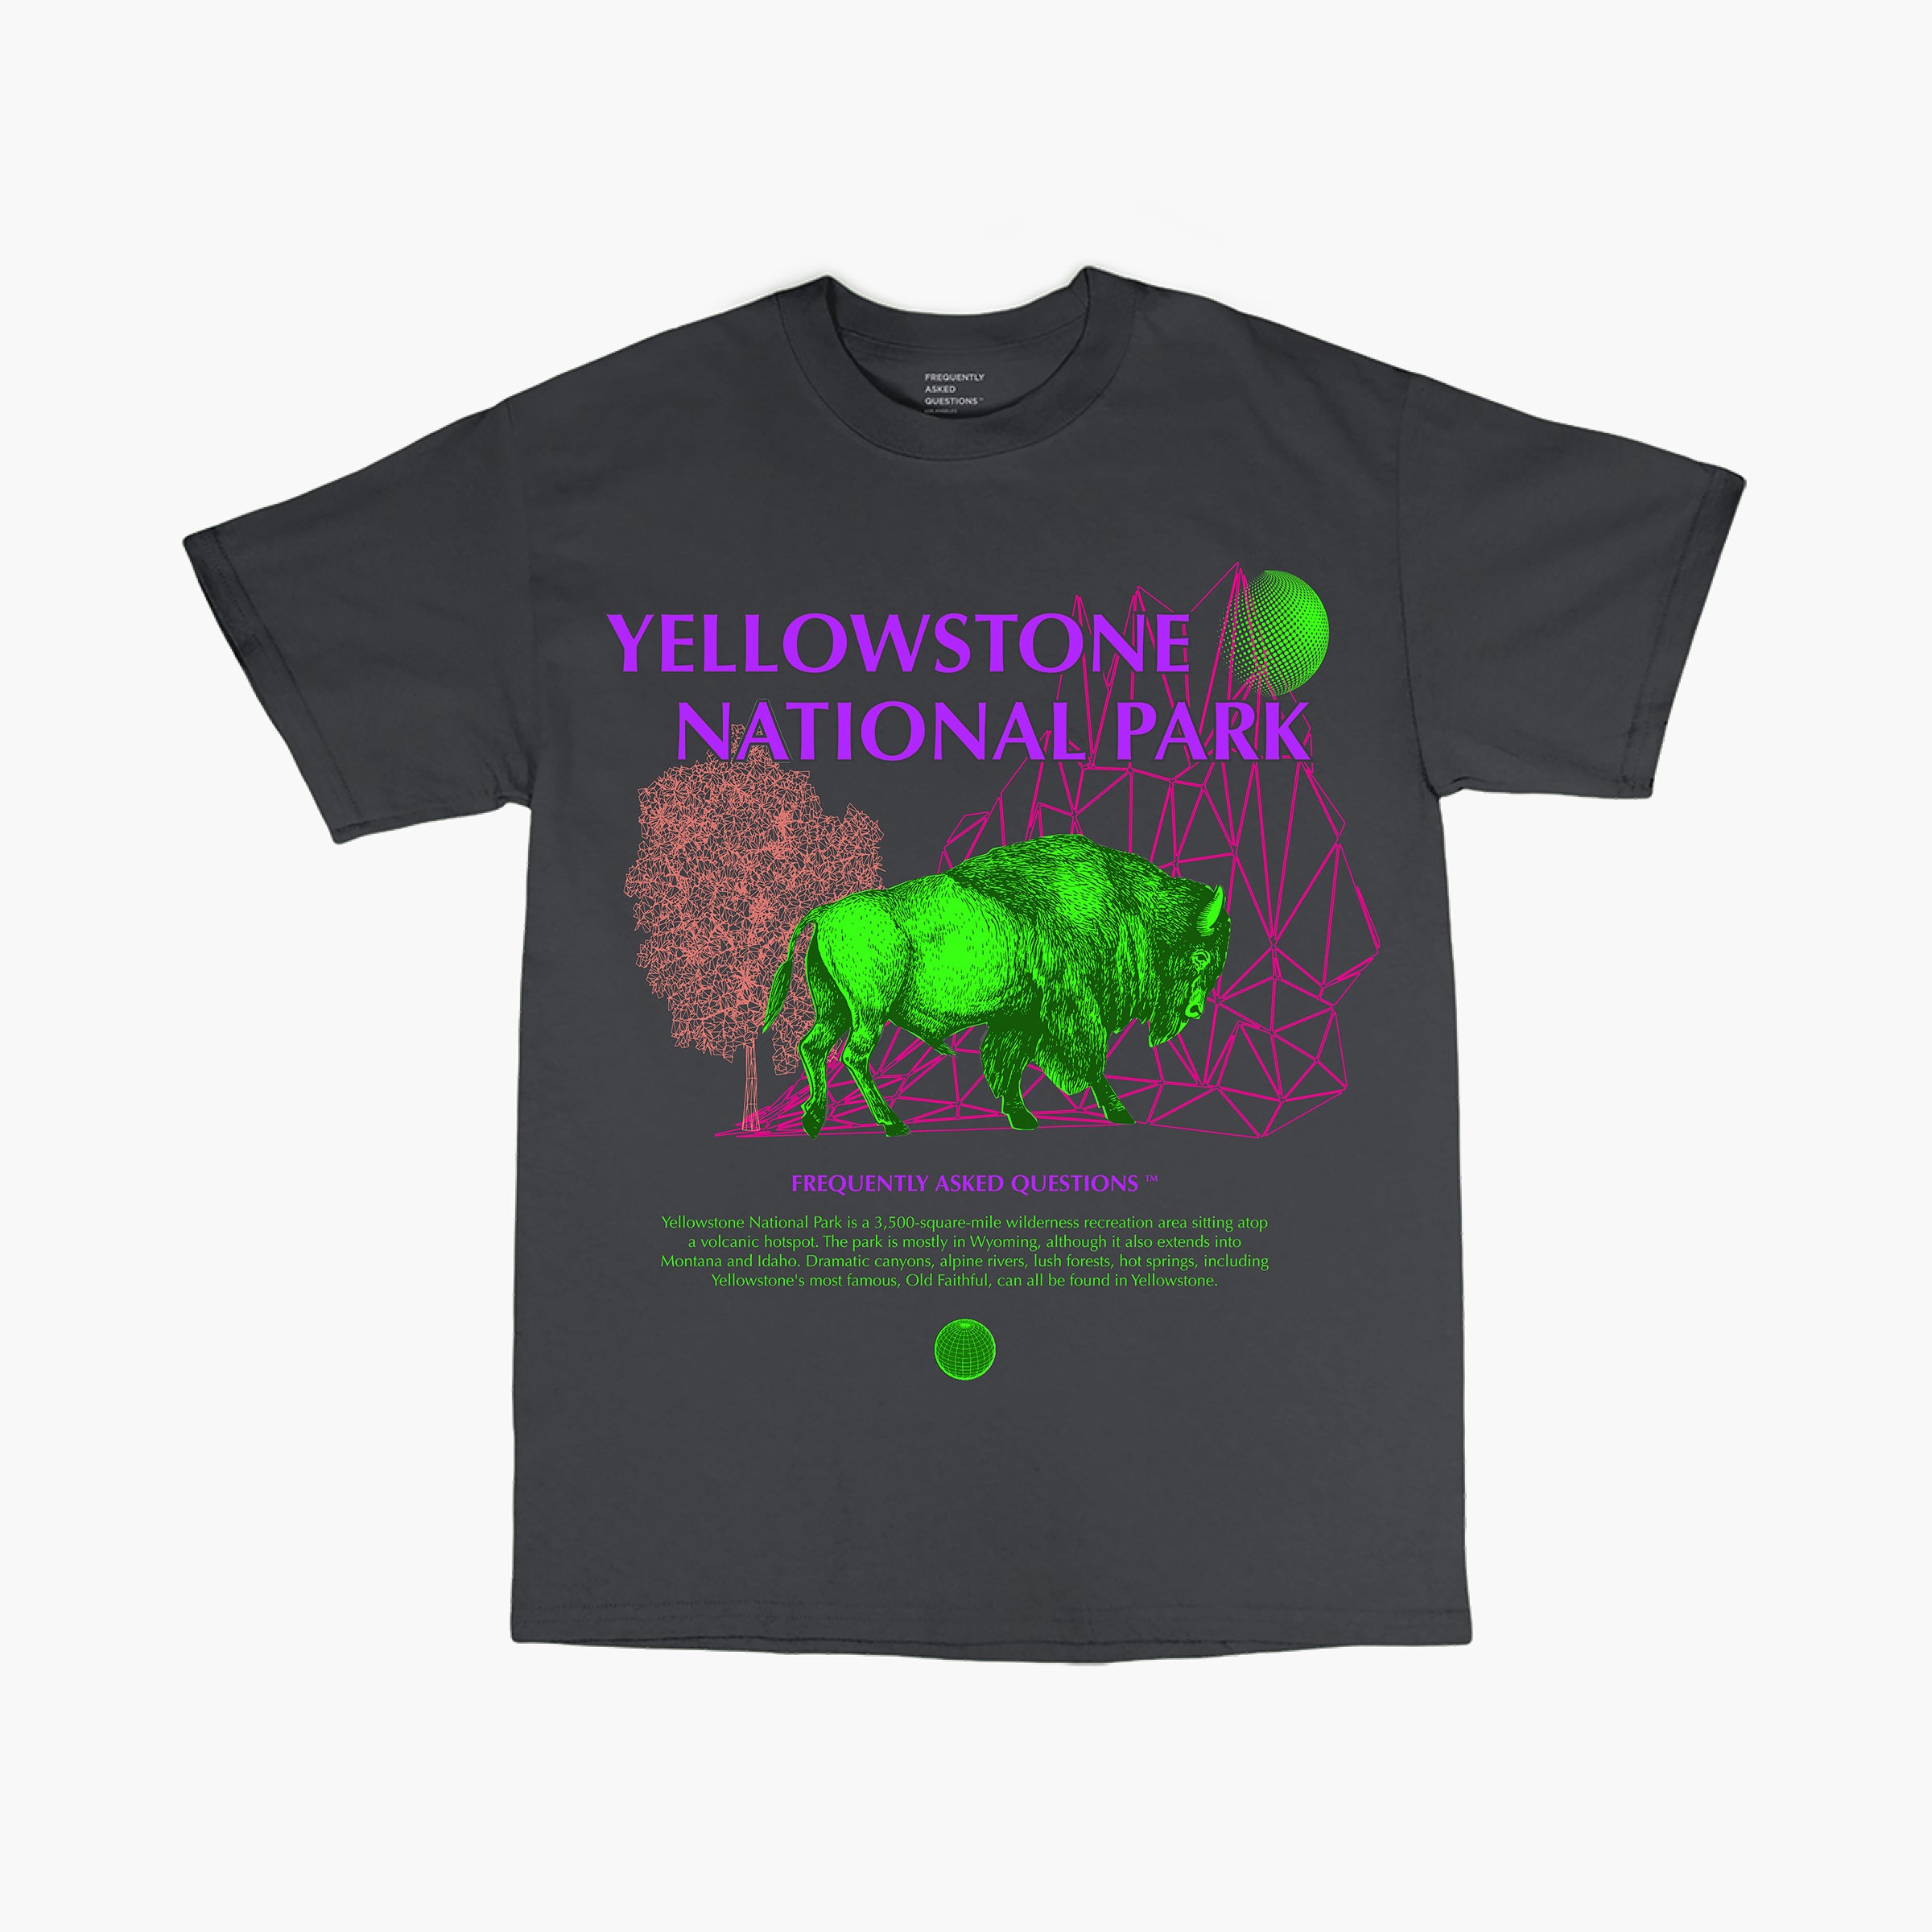 Yellowstone T-Shirt - Frequently Asked Questions